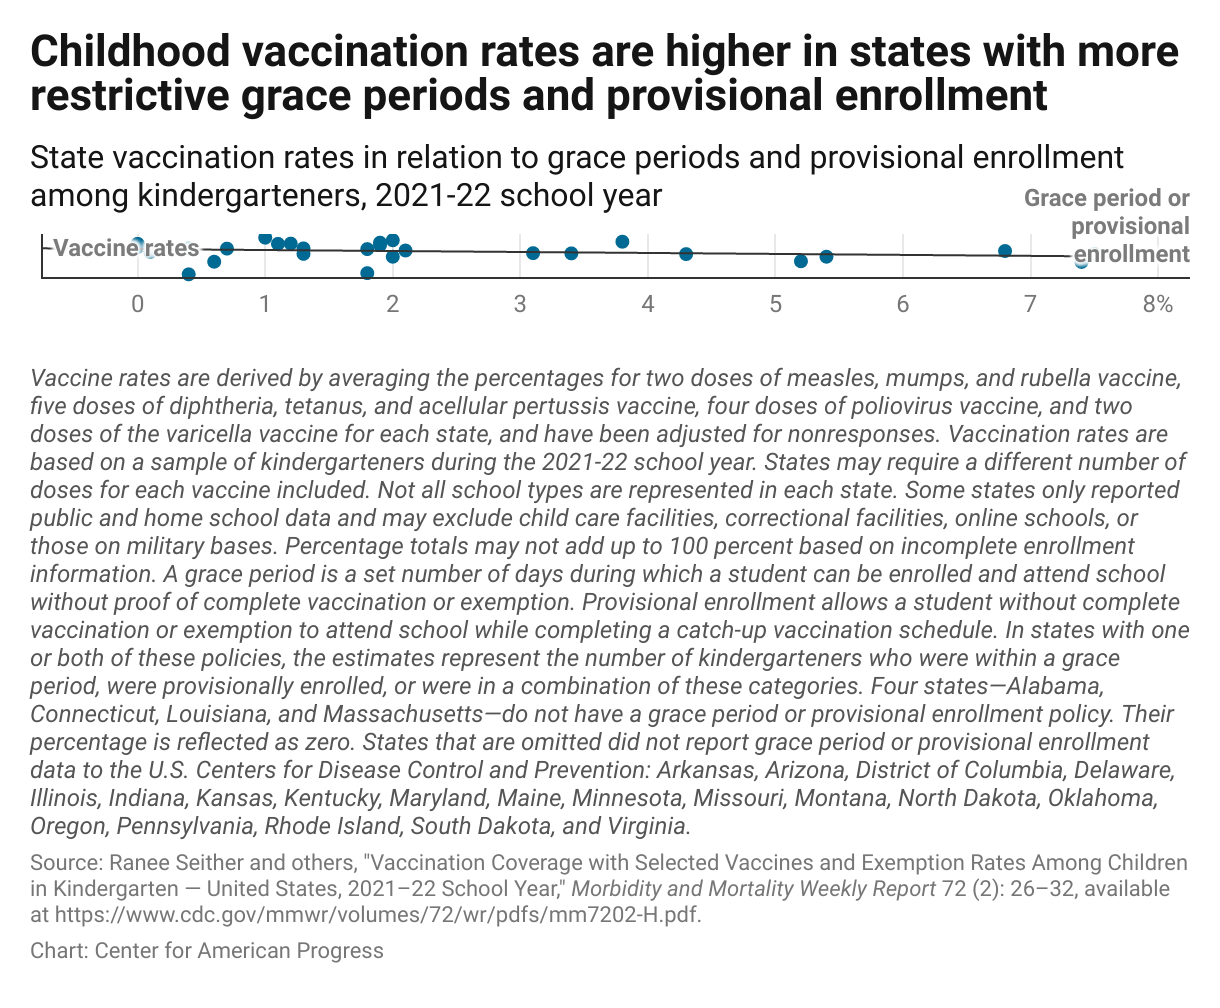 A scatterplot showing the correlation between vaccine rates and grace period or provisional enrollment among kindergarteners, where states with lower vaccine coverage rates tend to also grant more grace periods or provisional enrollments.